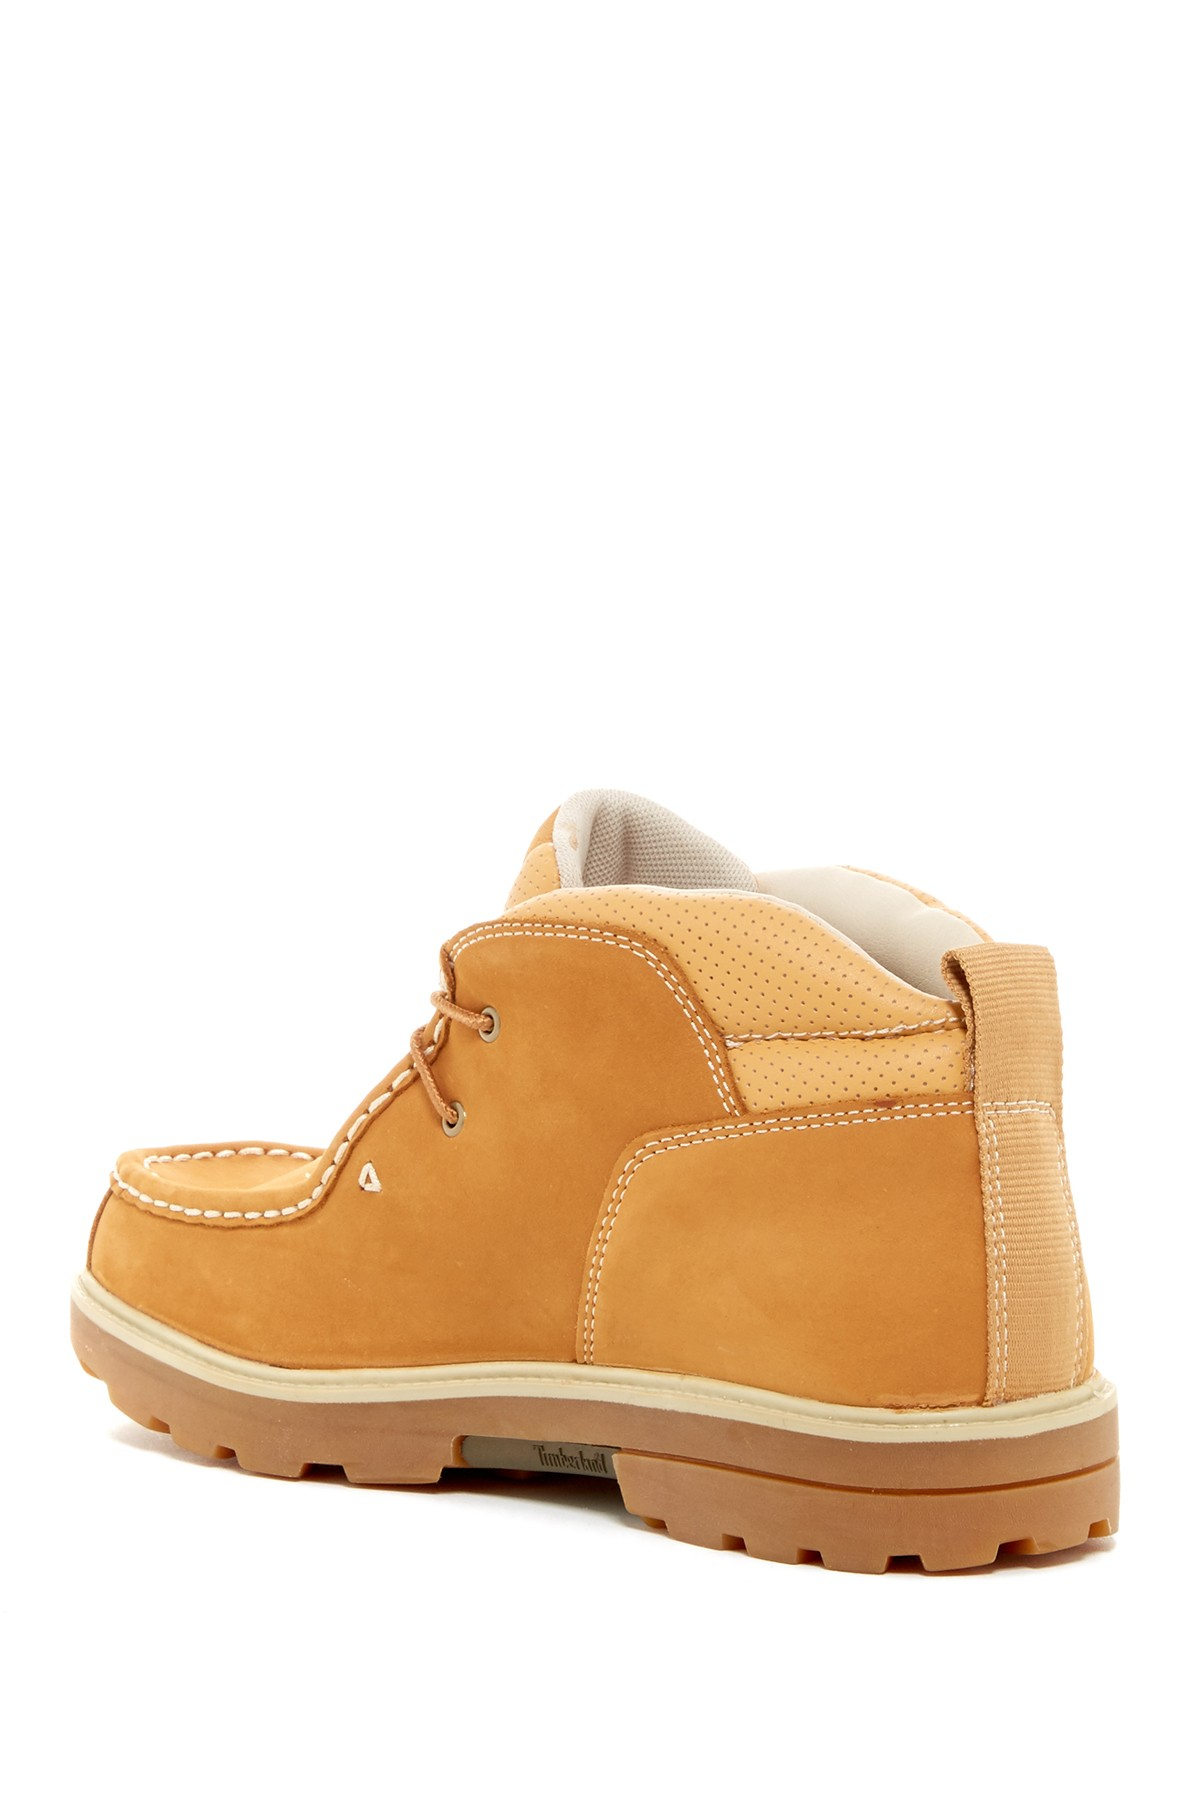 Timberland Rugged Street 2 Chukka Boot in Brown | Lyst